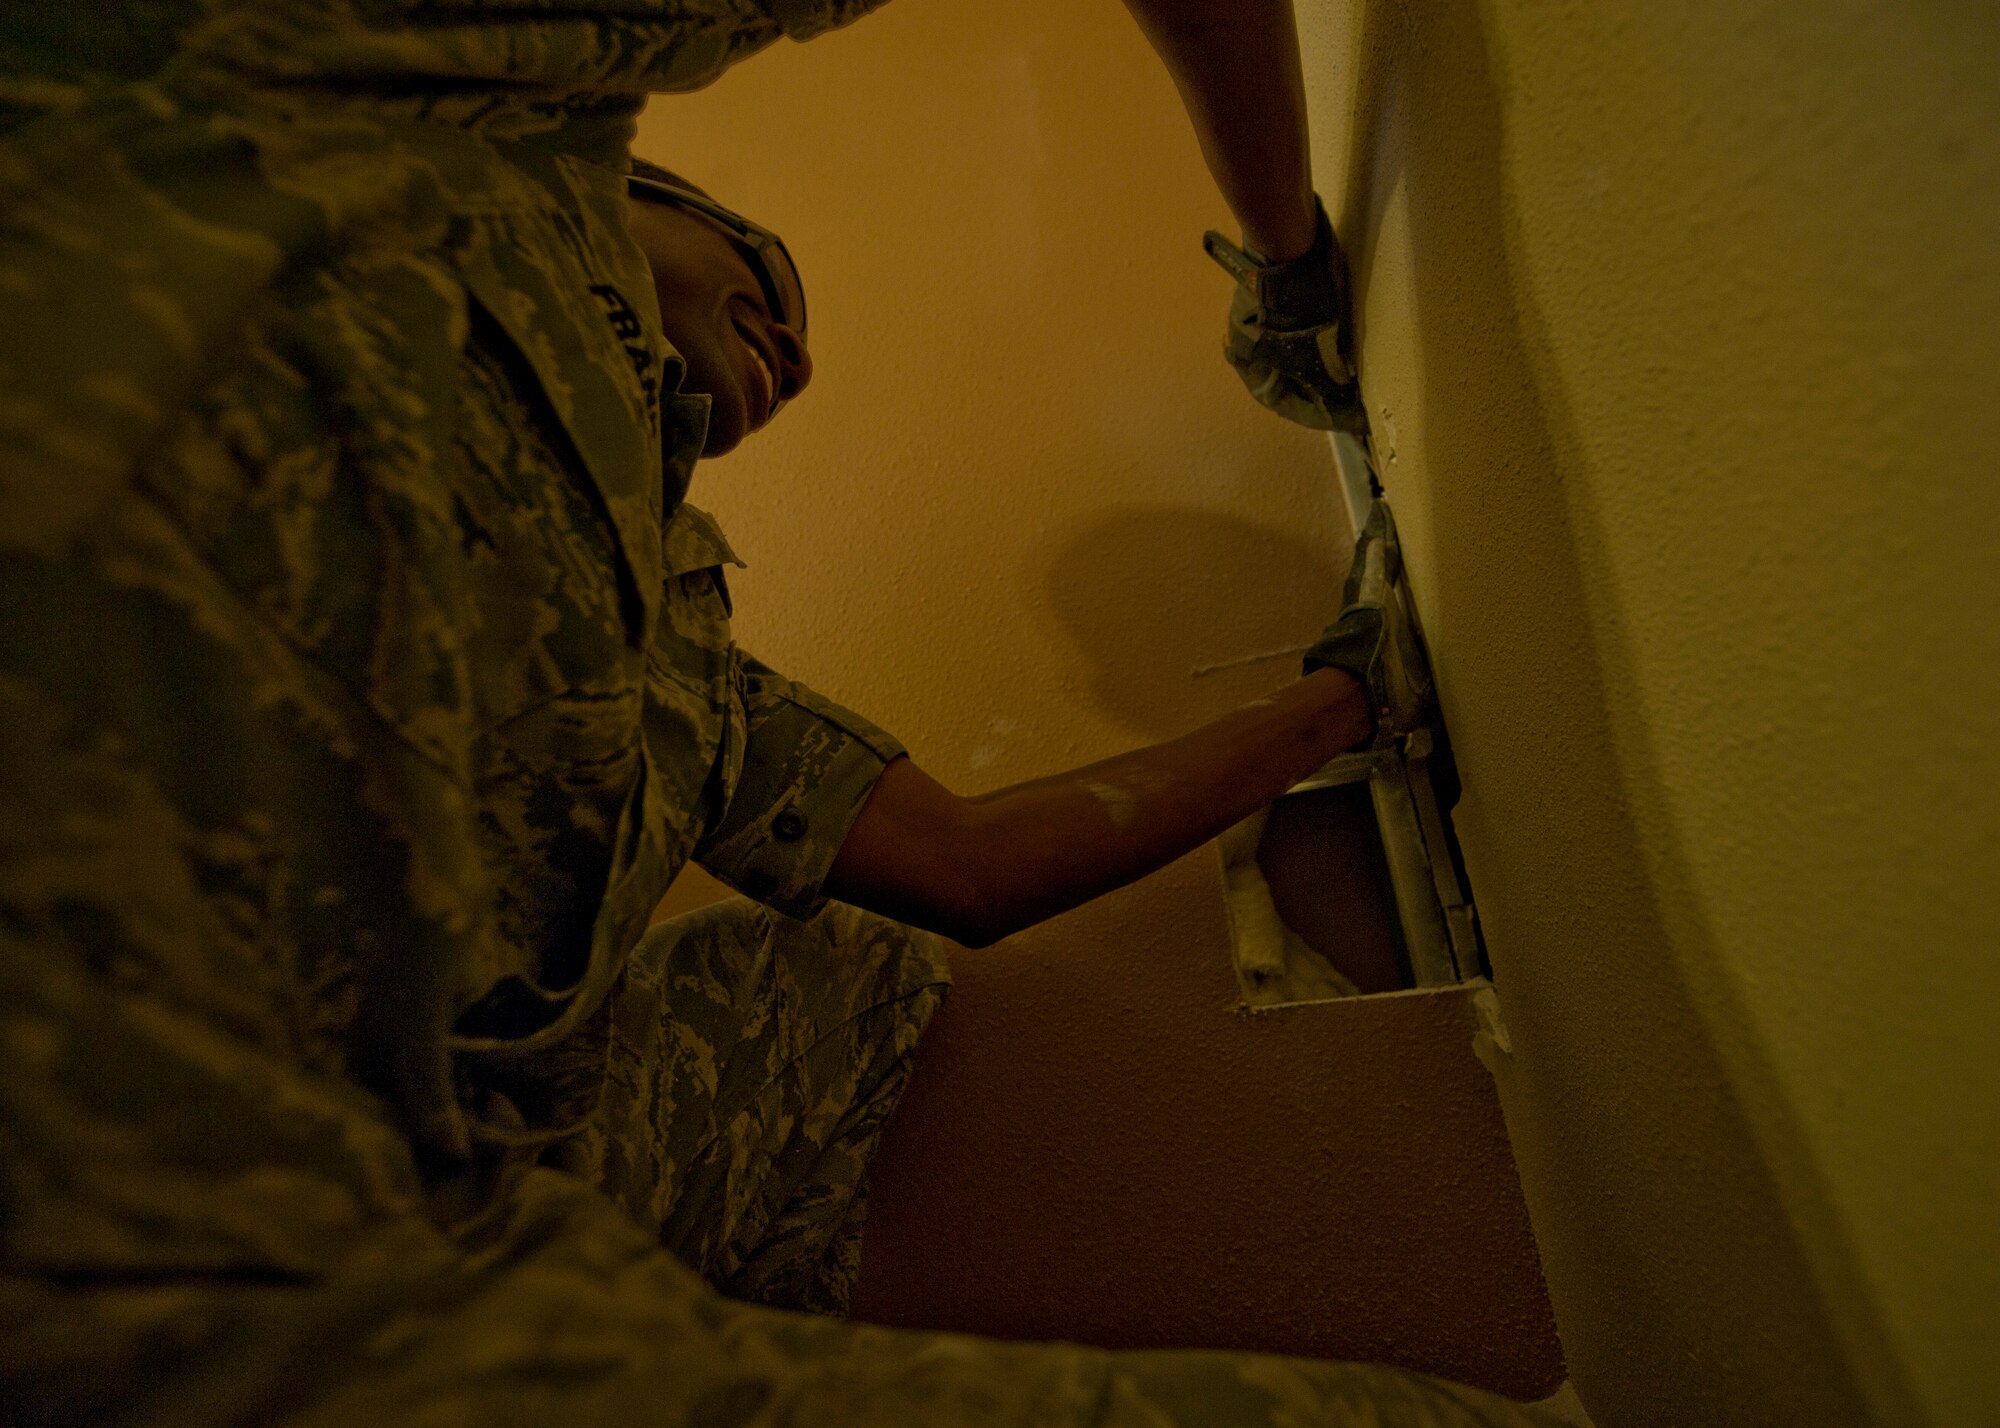 Staff Sgt. Alan Franklin, 99th Civil Engineer Squadron water and fuels systems maintenance craftsman, cuts a hole in the wall to get to a drain pipe at the Nellis Inn on Nellis Air Force Base, Nev., Aug. 19, 2014. Once the hole was cut, Franklin was able to unclog the drain pipe without taking it out of the wall or replacing it. Franklin and other water and fuels systems maintenance technicians are responsible for taking care of all the fire suppression systems and backflow prevention systems, in addition to all of the plumbing systems on base. (U.S. Air Force photo by Staff Sgt. Siuta B. Ika)